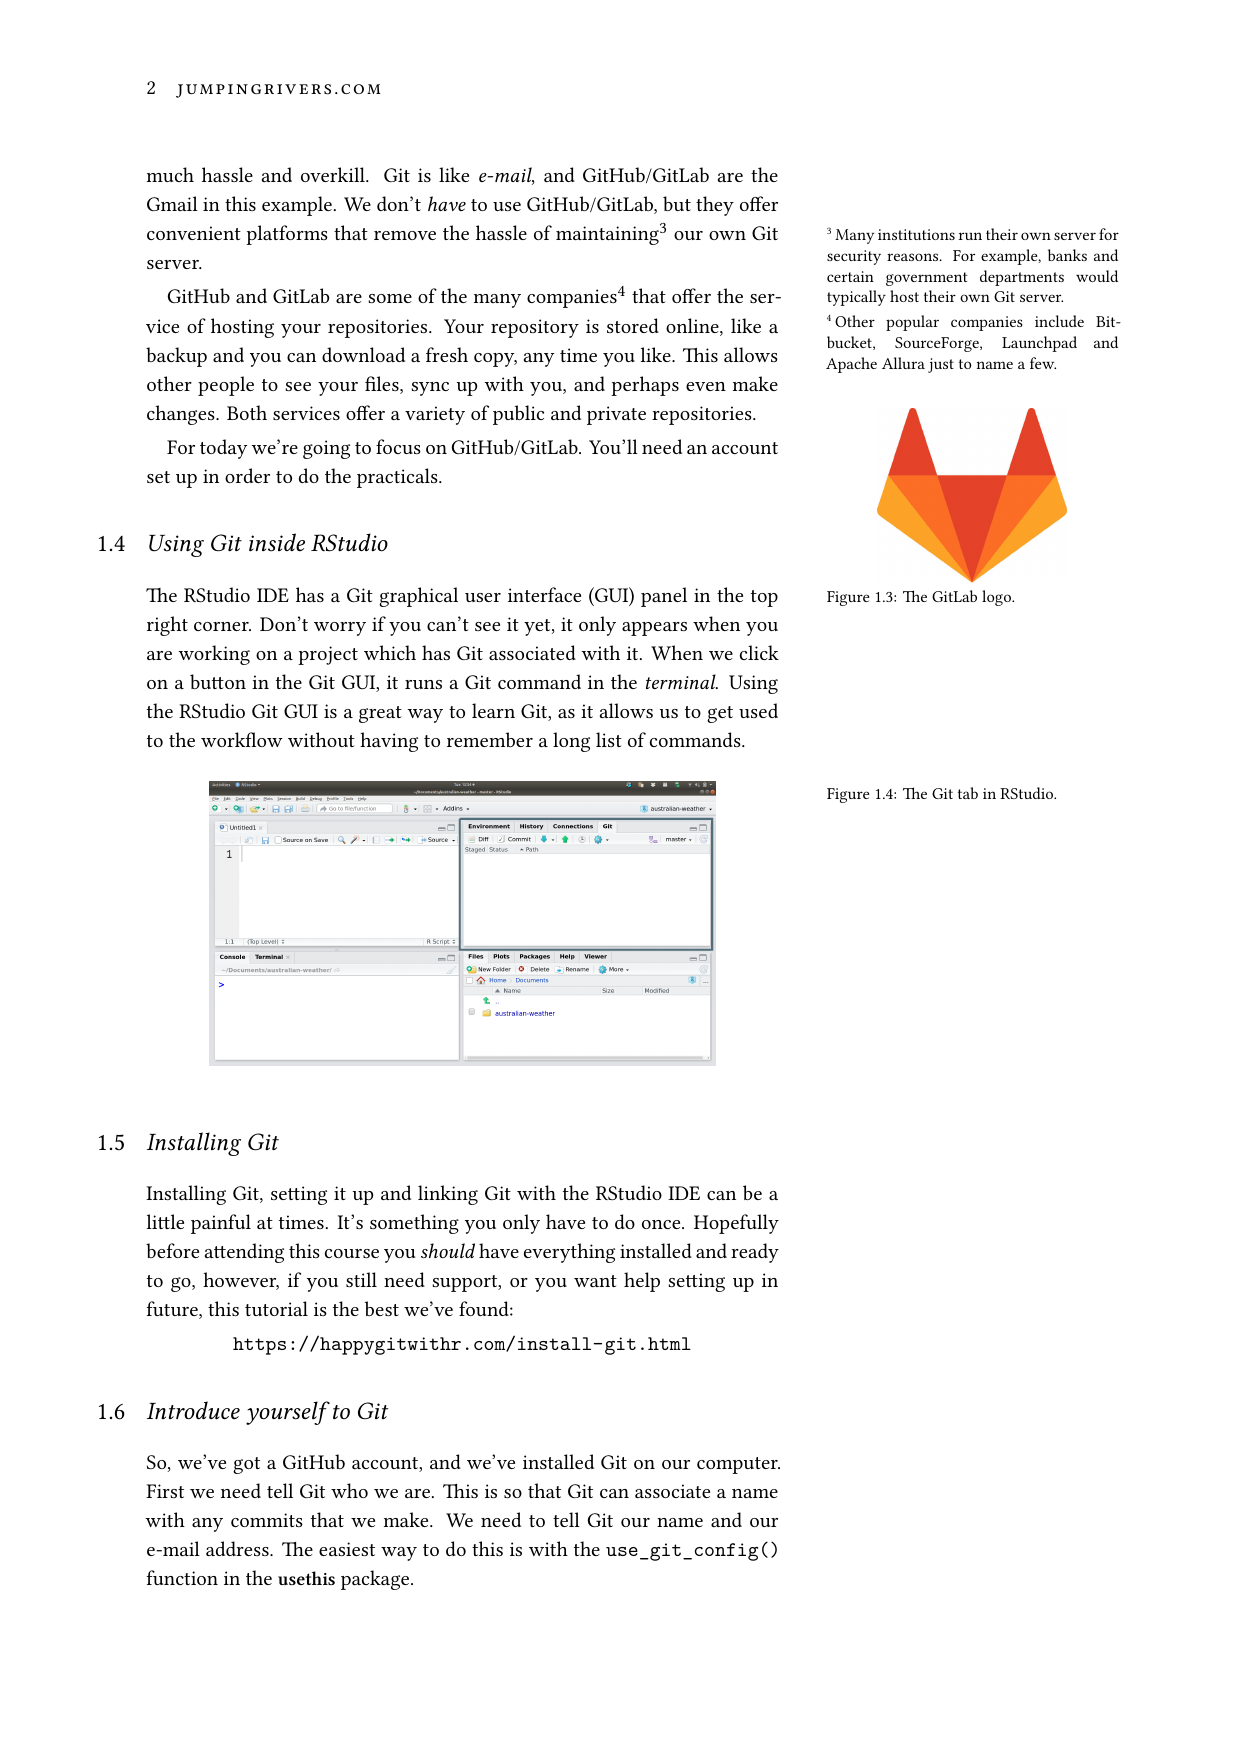 Page 3 of example course material for Git for Me